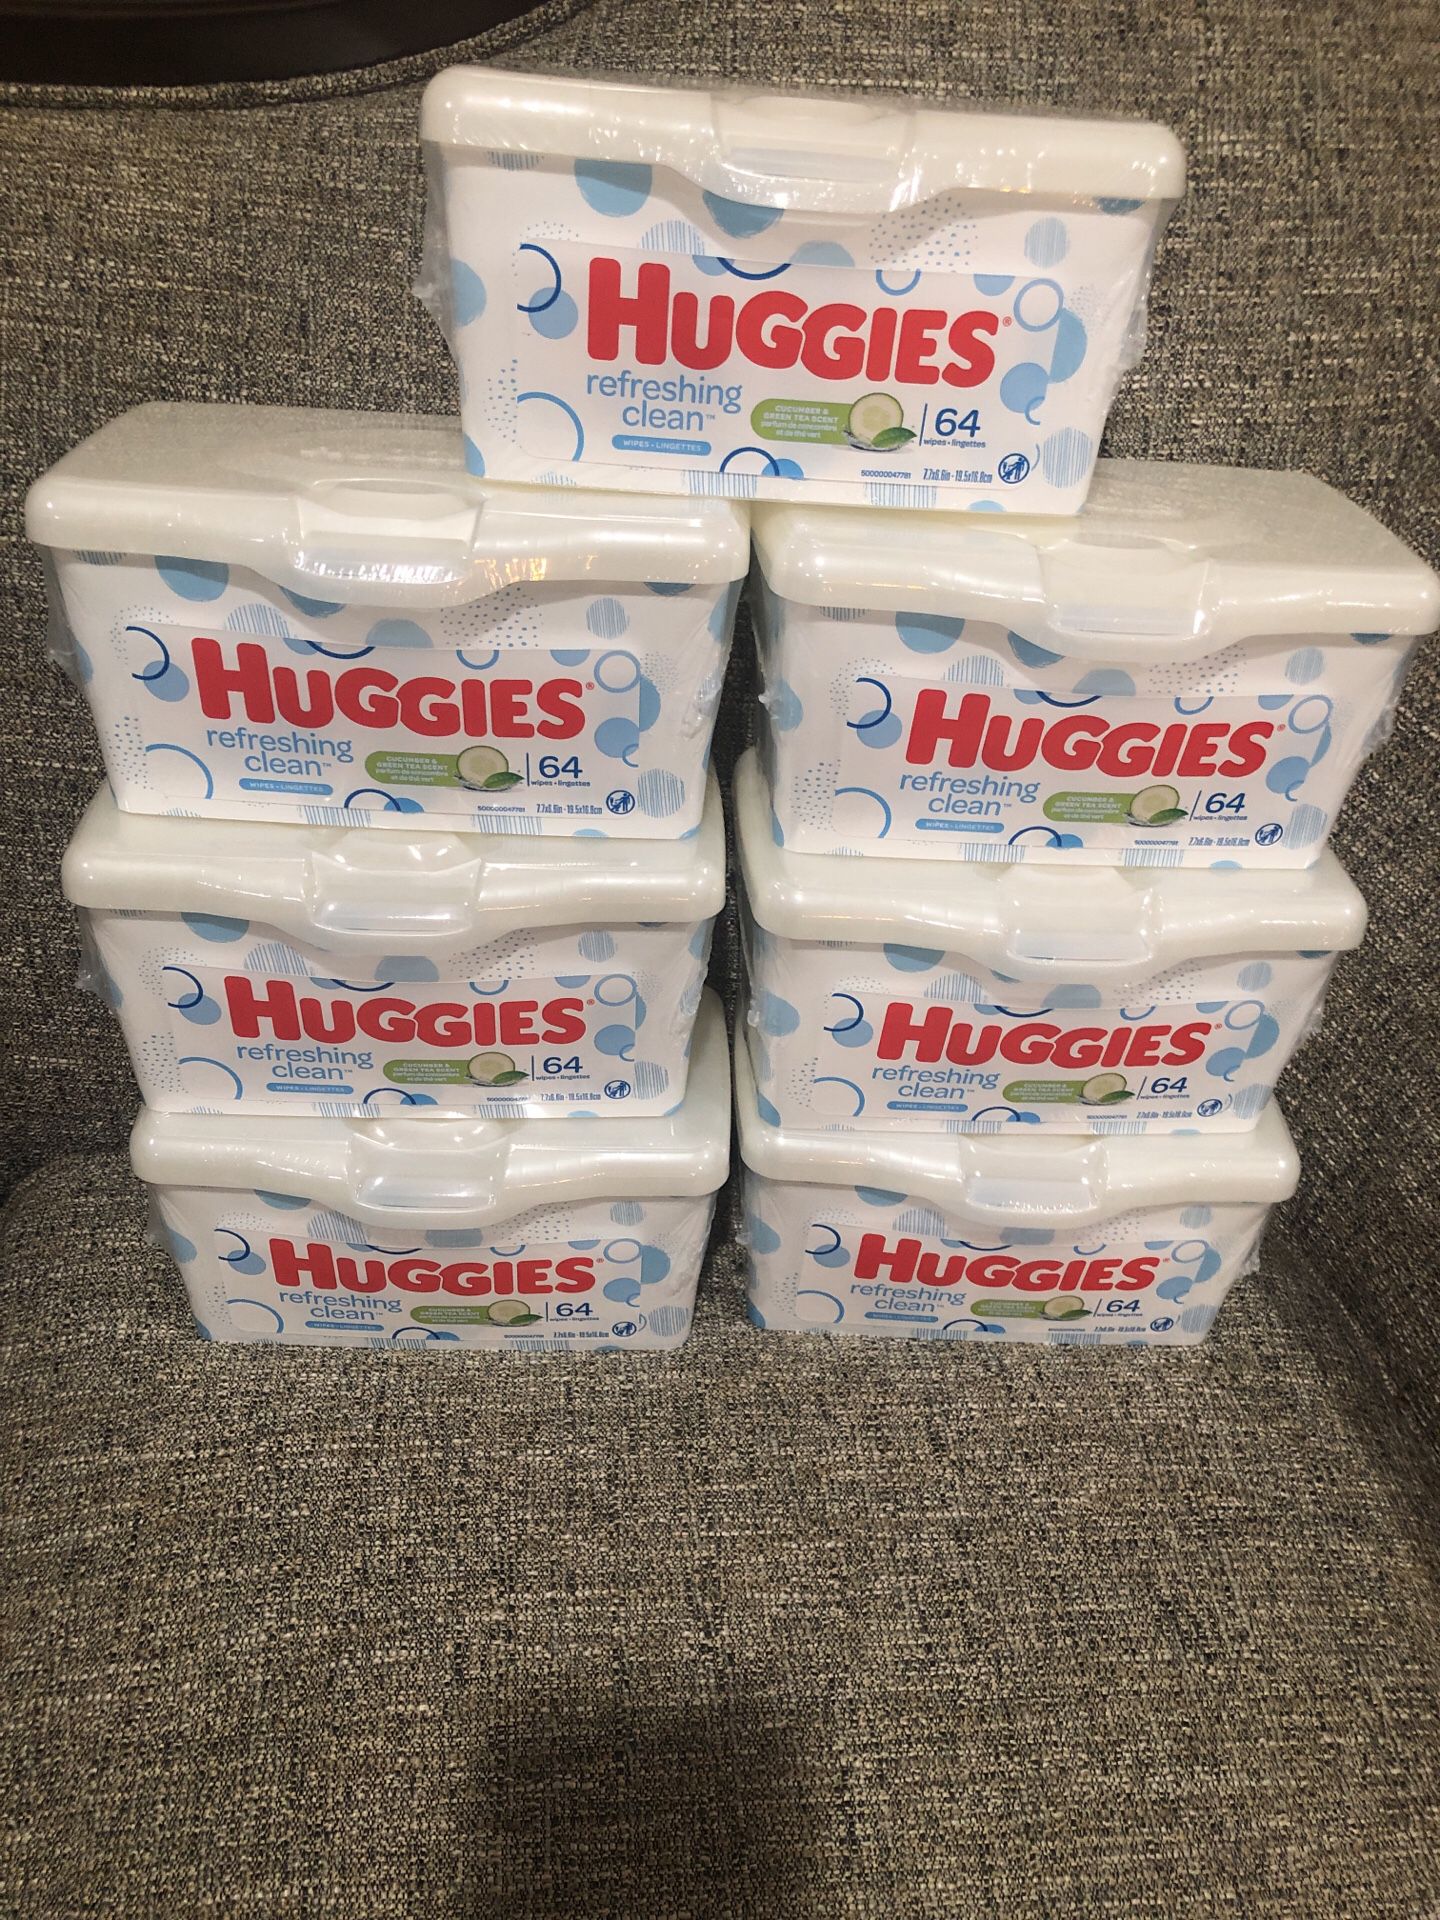 7 Packs HUGG IES Wipes. Please see all the pictures and read the description